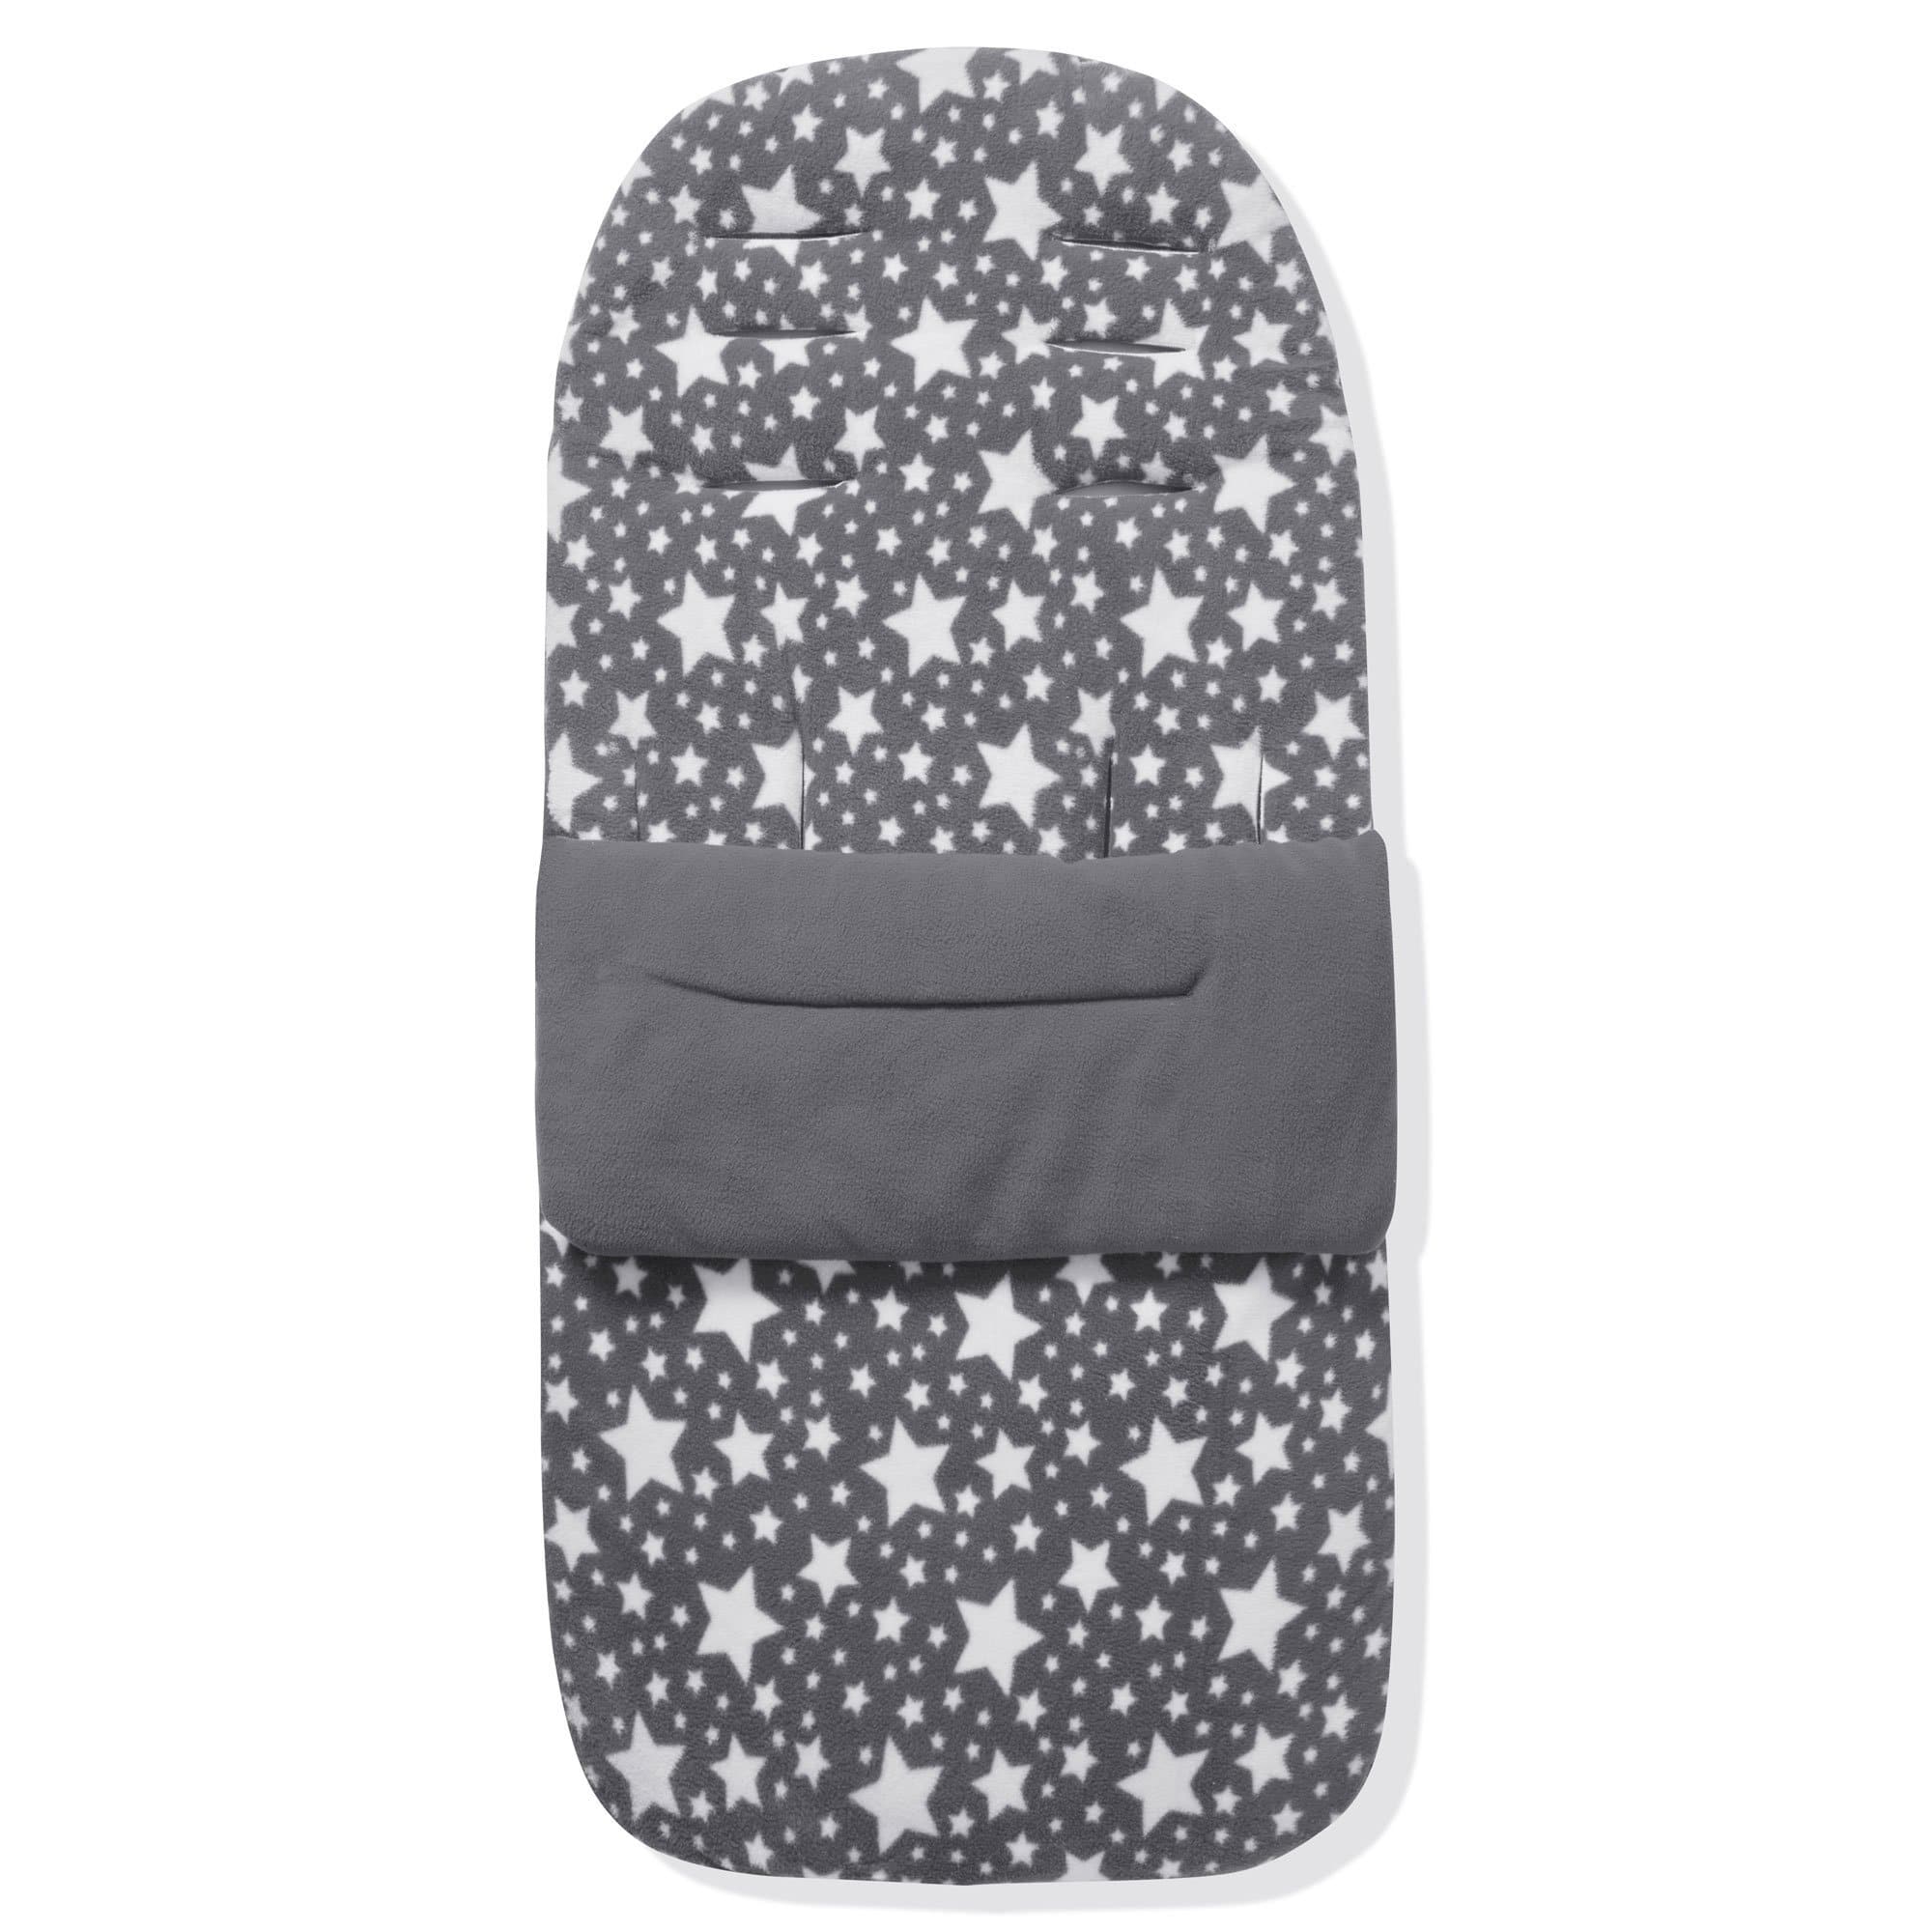 Fleece Footmuff / Cosy Toes Compatible with Casual - Grey Star / Fits All Models | For Your Little One